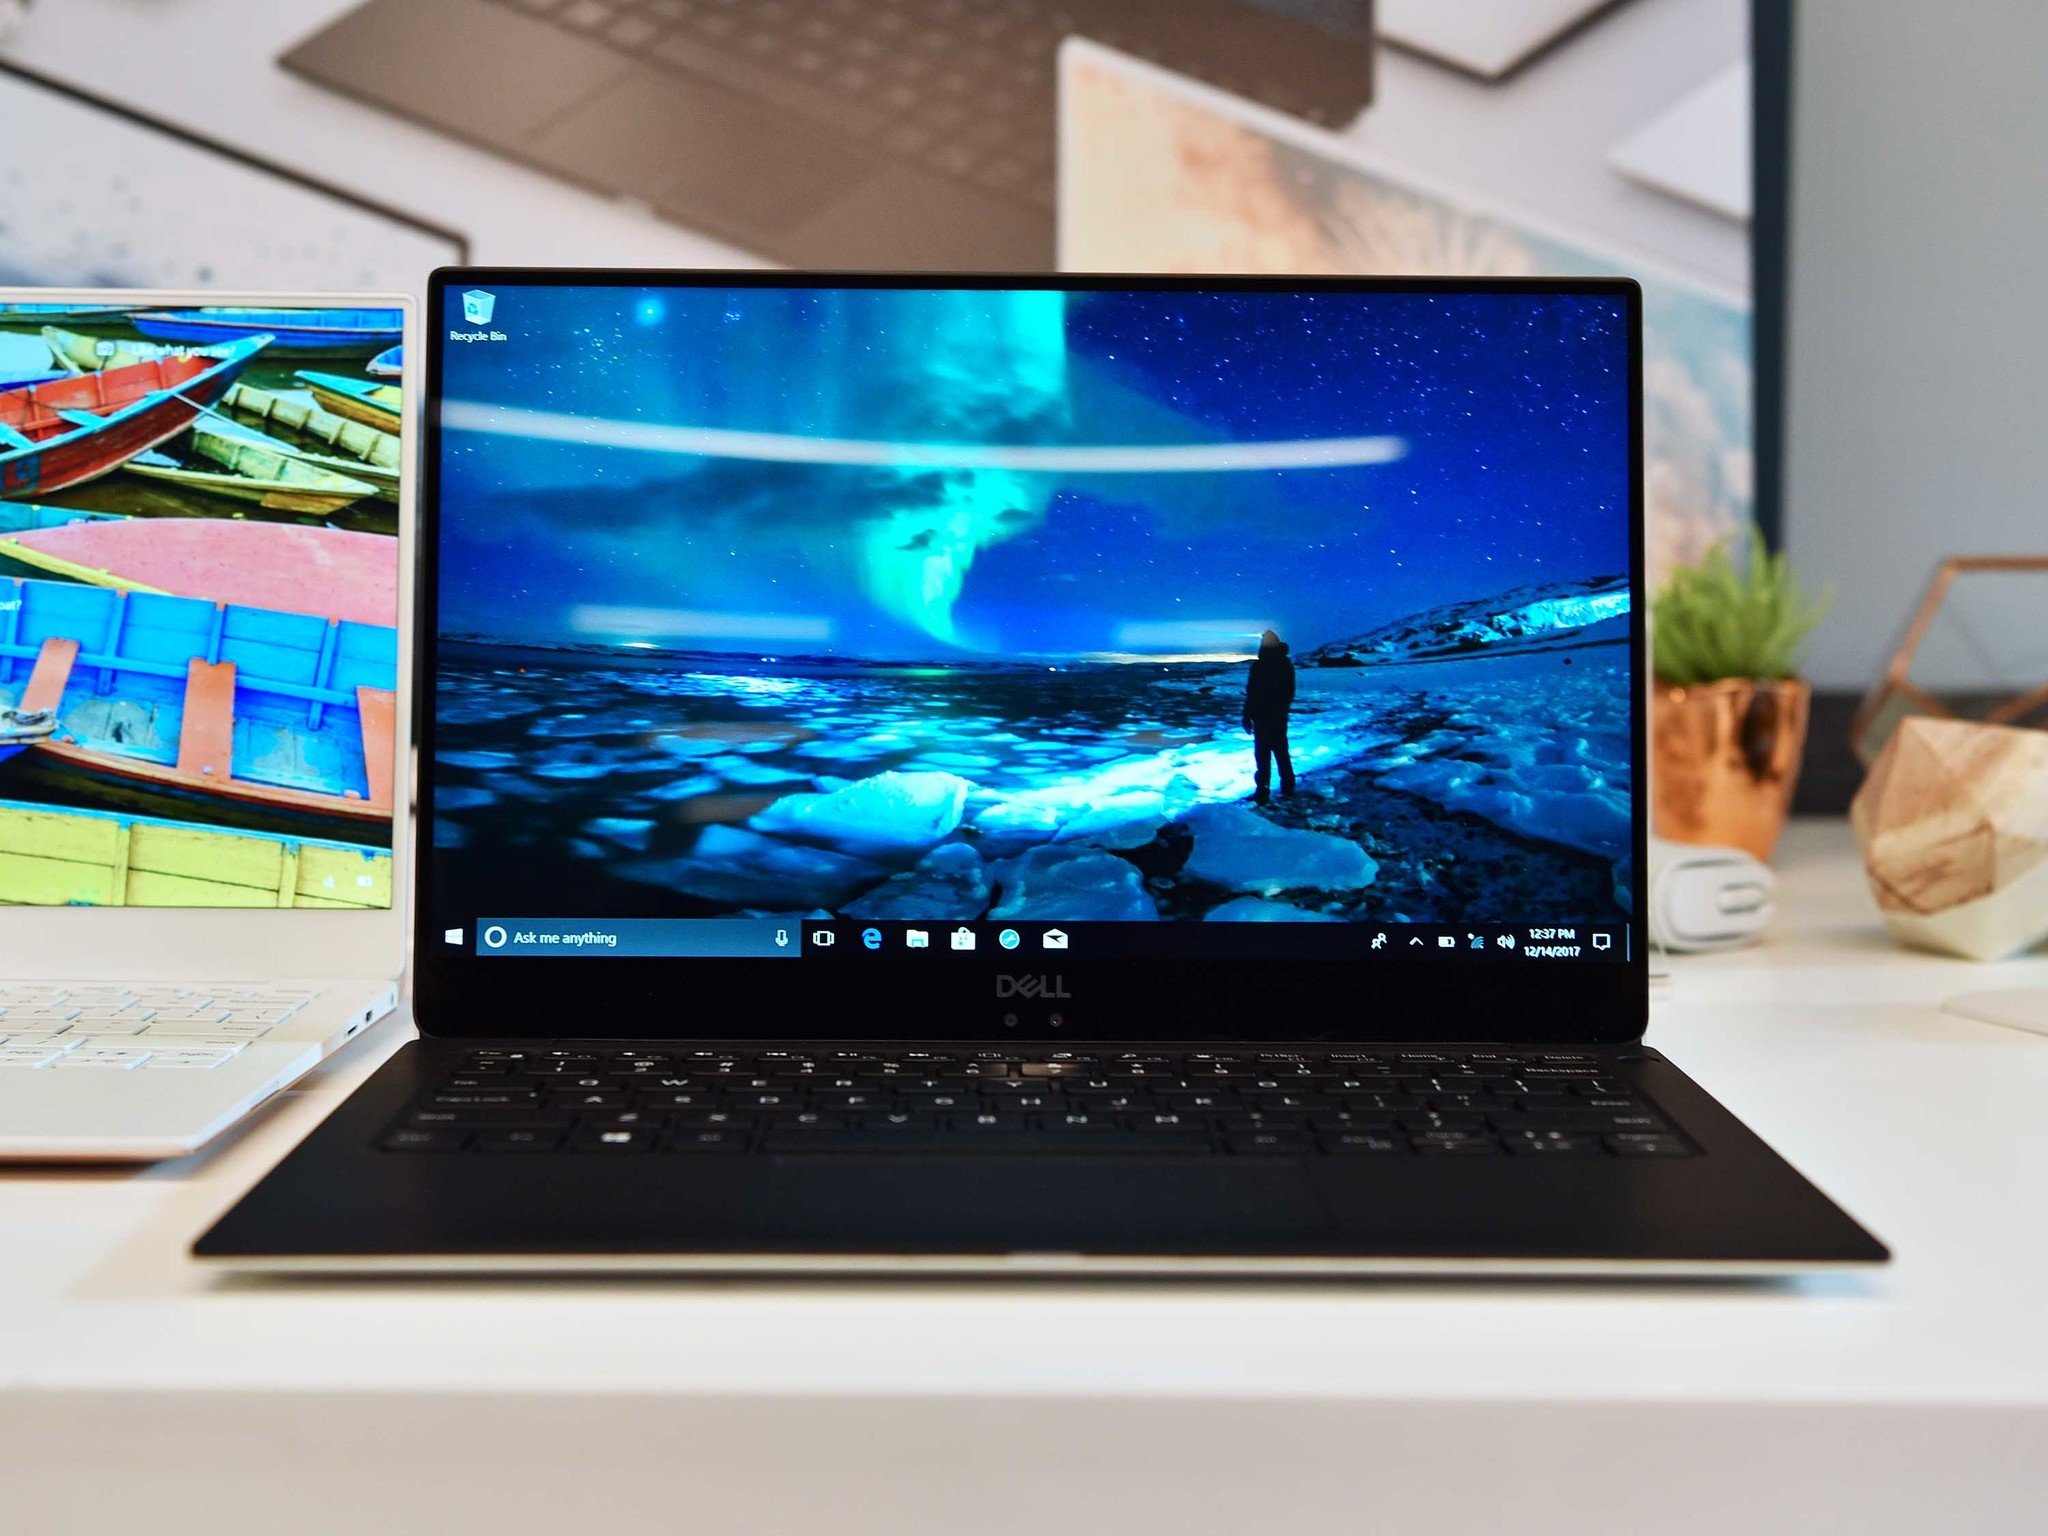 WindowsCentral: Win the XPS 13 (9370) laptop in Platinum Silvere